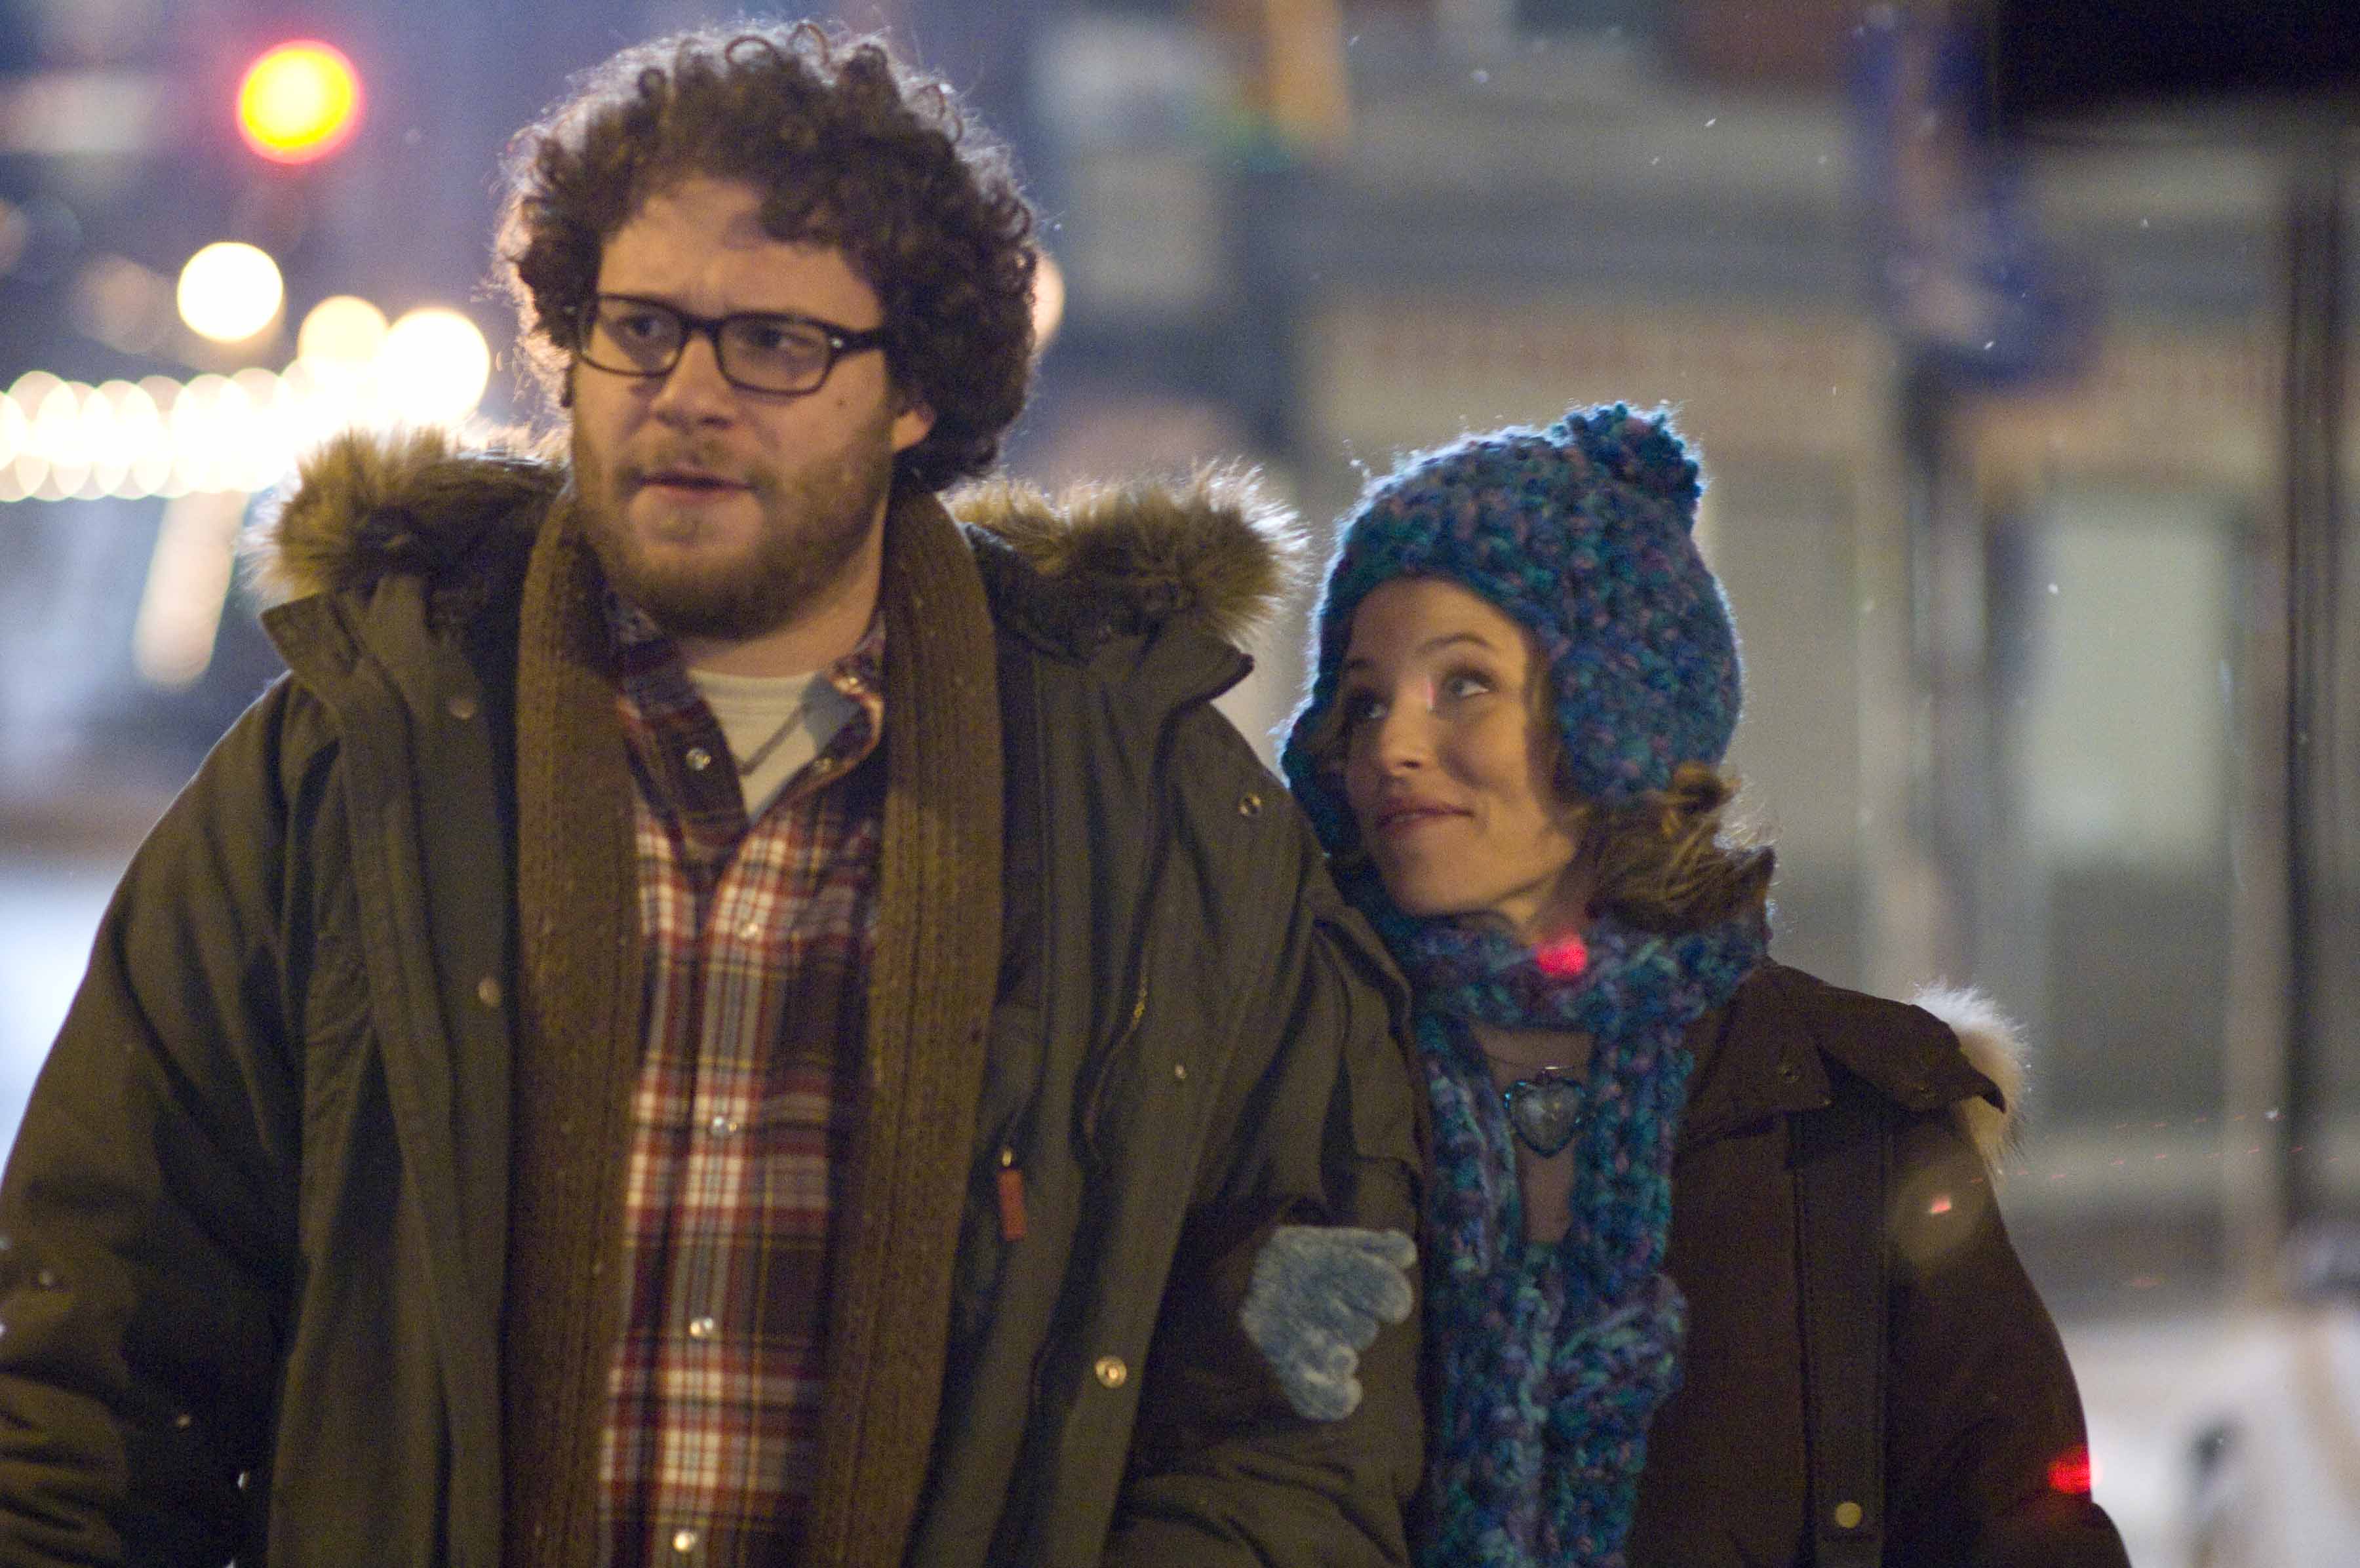 Official Plot Synopsis: Lifelong friends Zack Brown (Seth Rogen) and Miriam Linky (El...